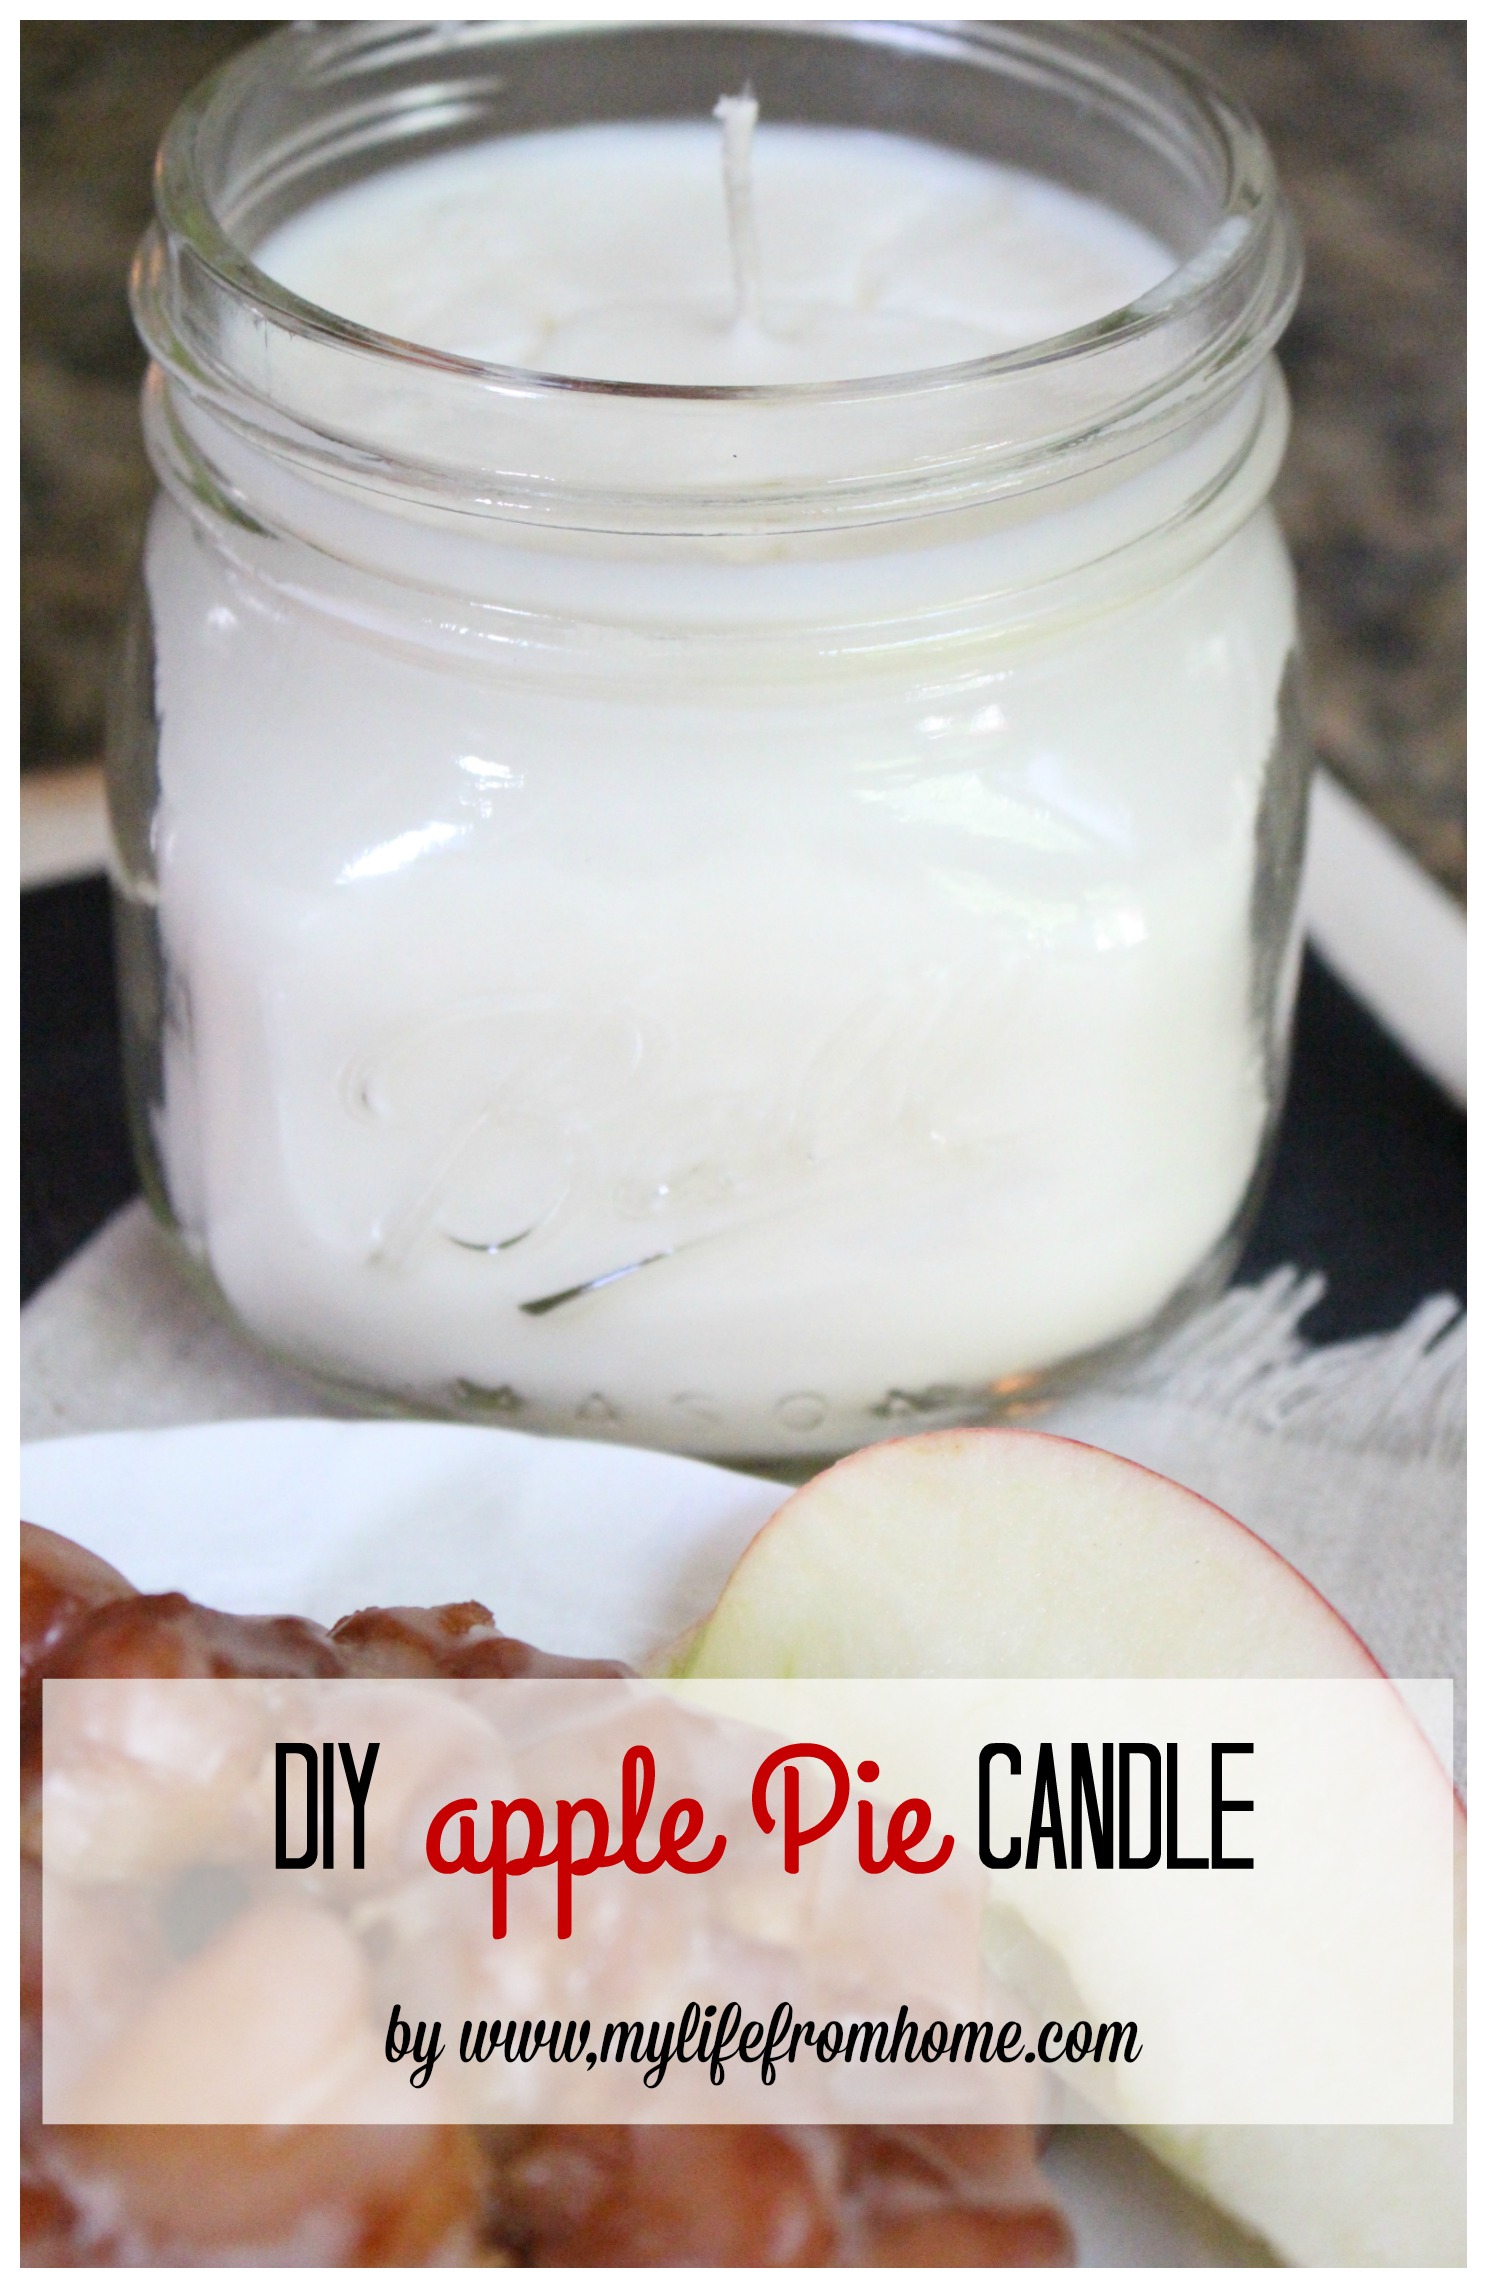 diy-apple-pie-candle-diy-candle-how-to-make-your-own-candle-mason-jar-crafts-craft-candles-scented-candles-diy-candle